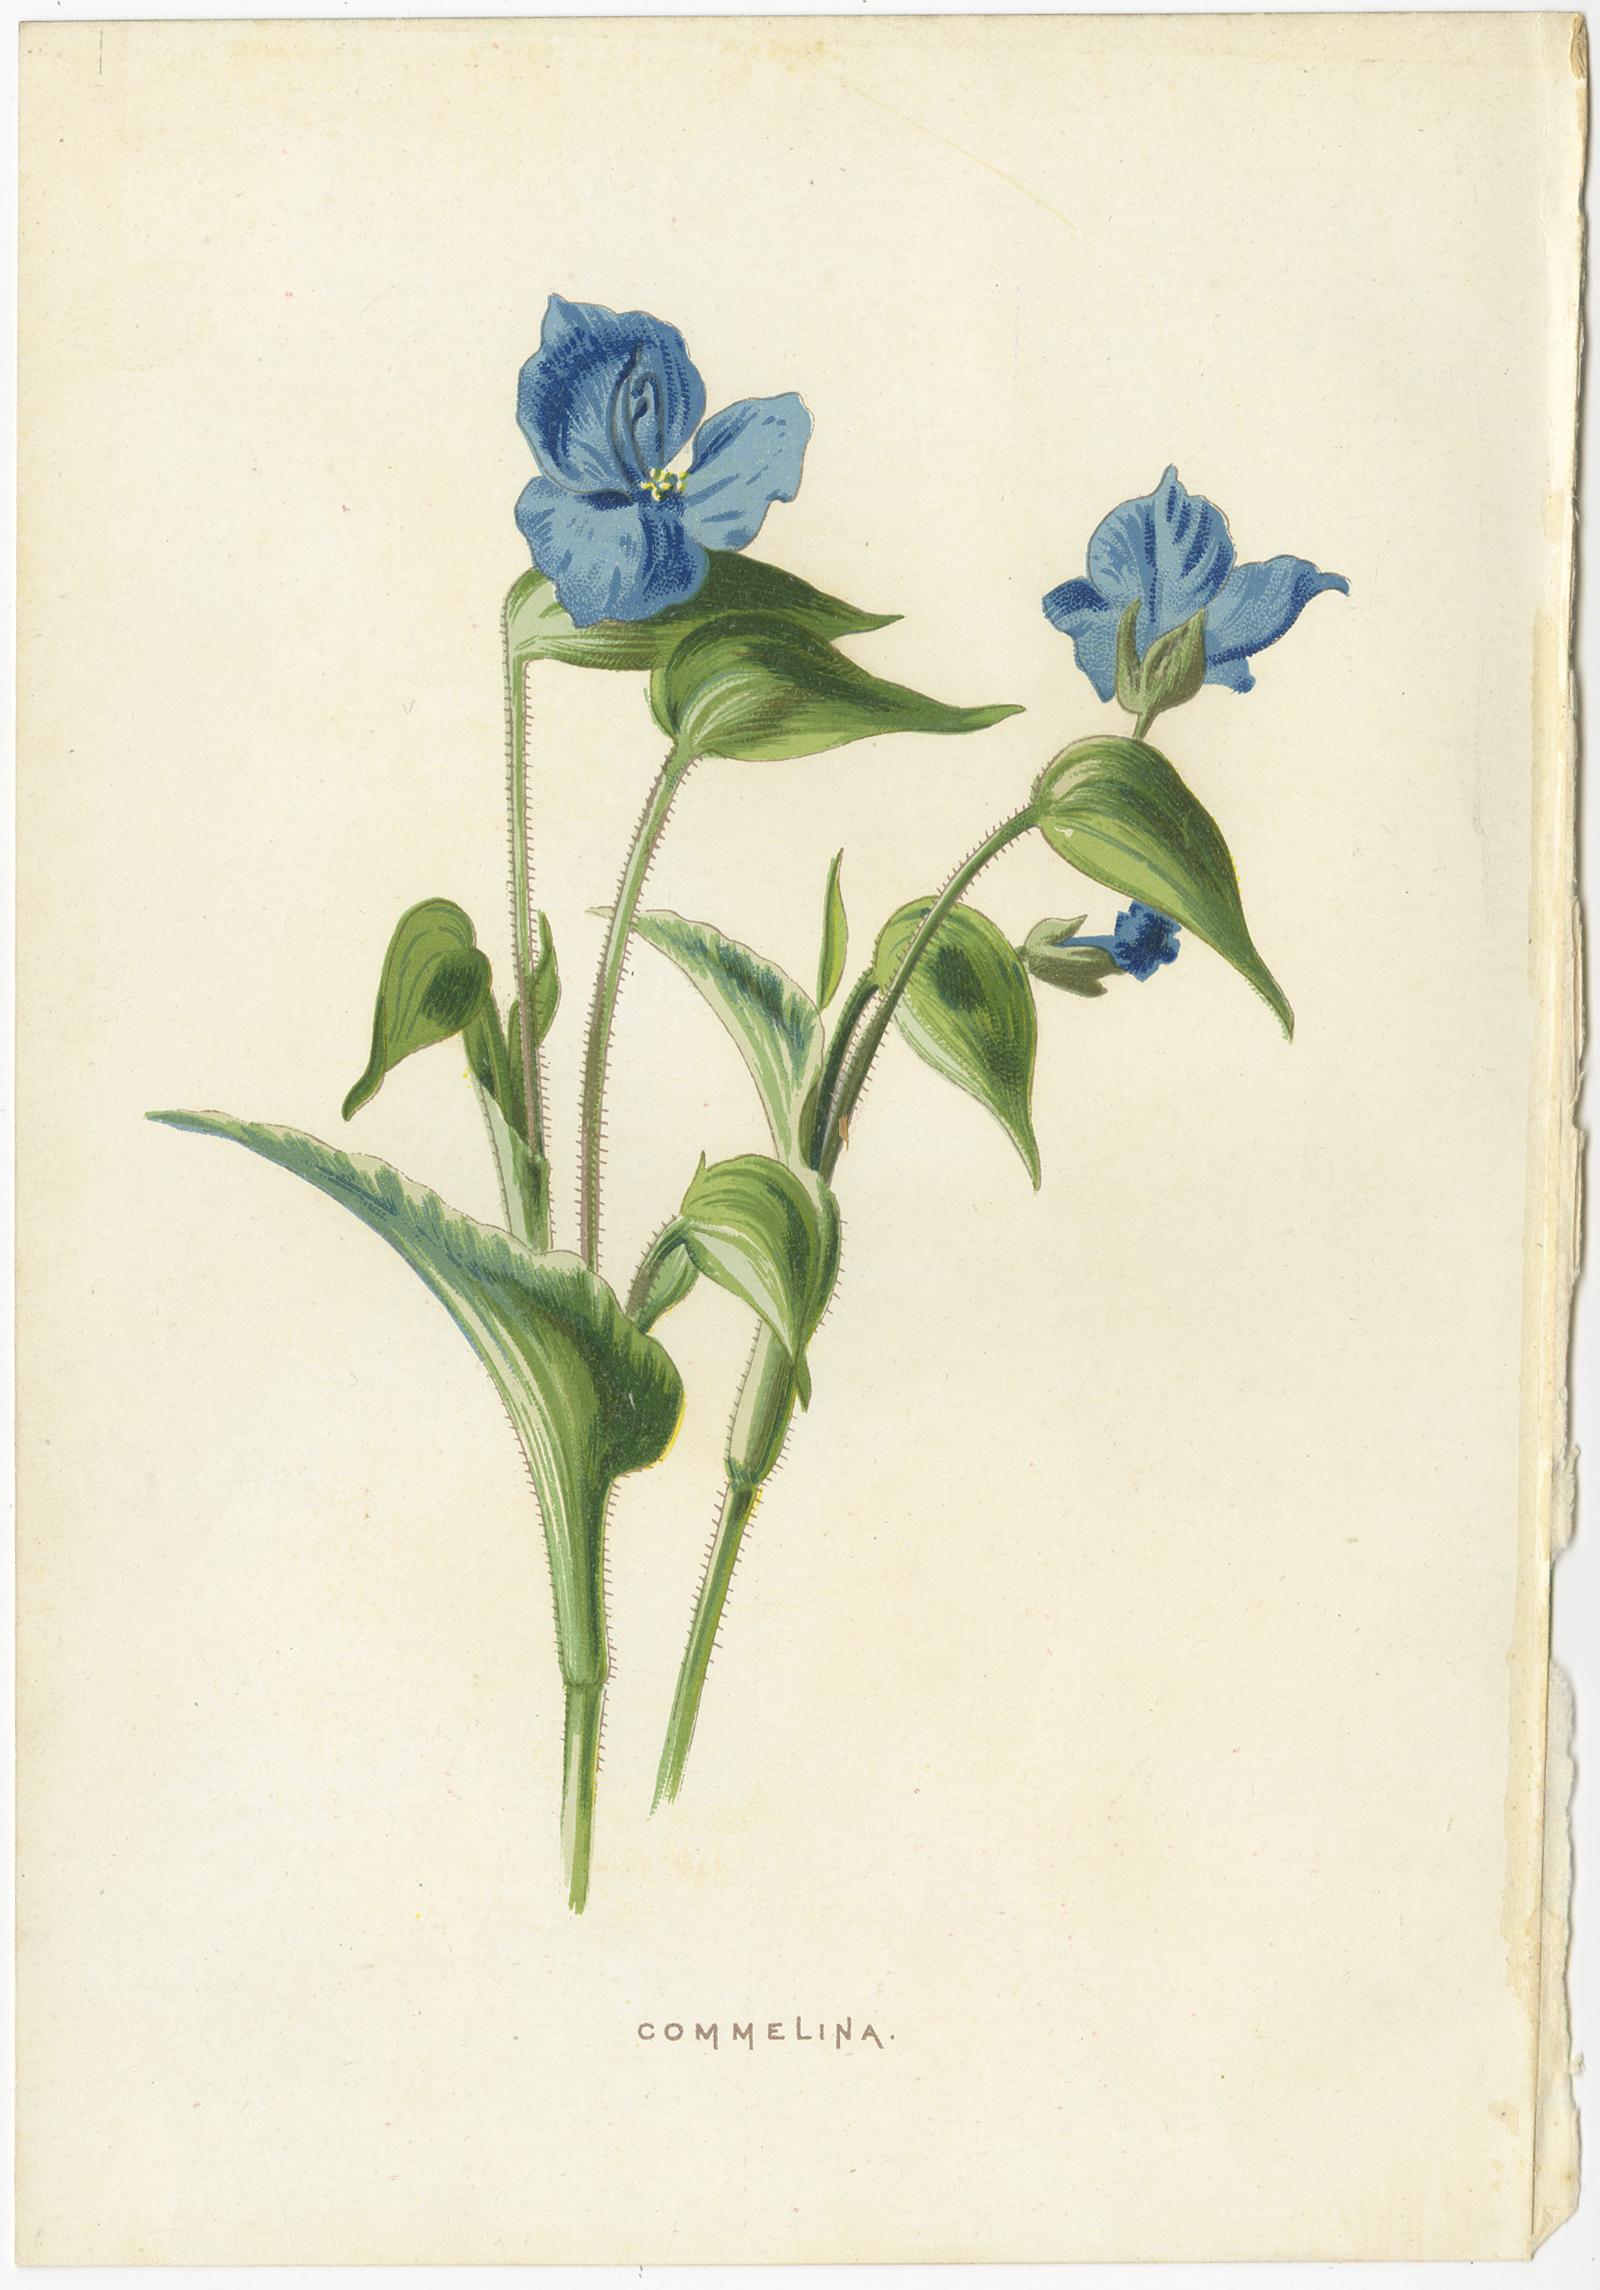 Set of three antique chromolithographs titled 'Commelina - Browallia - Blue Sage'. These prints originate from 'Familiar Garden Flowers' by F. Edward Hulme & Shirley Hibberd. Published in circa 1880.